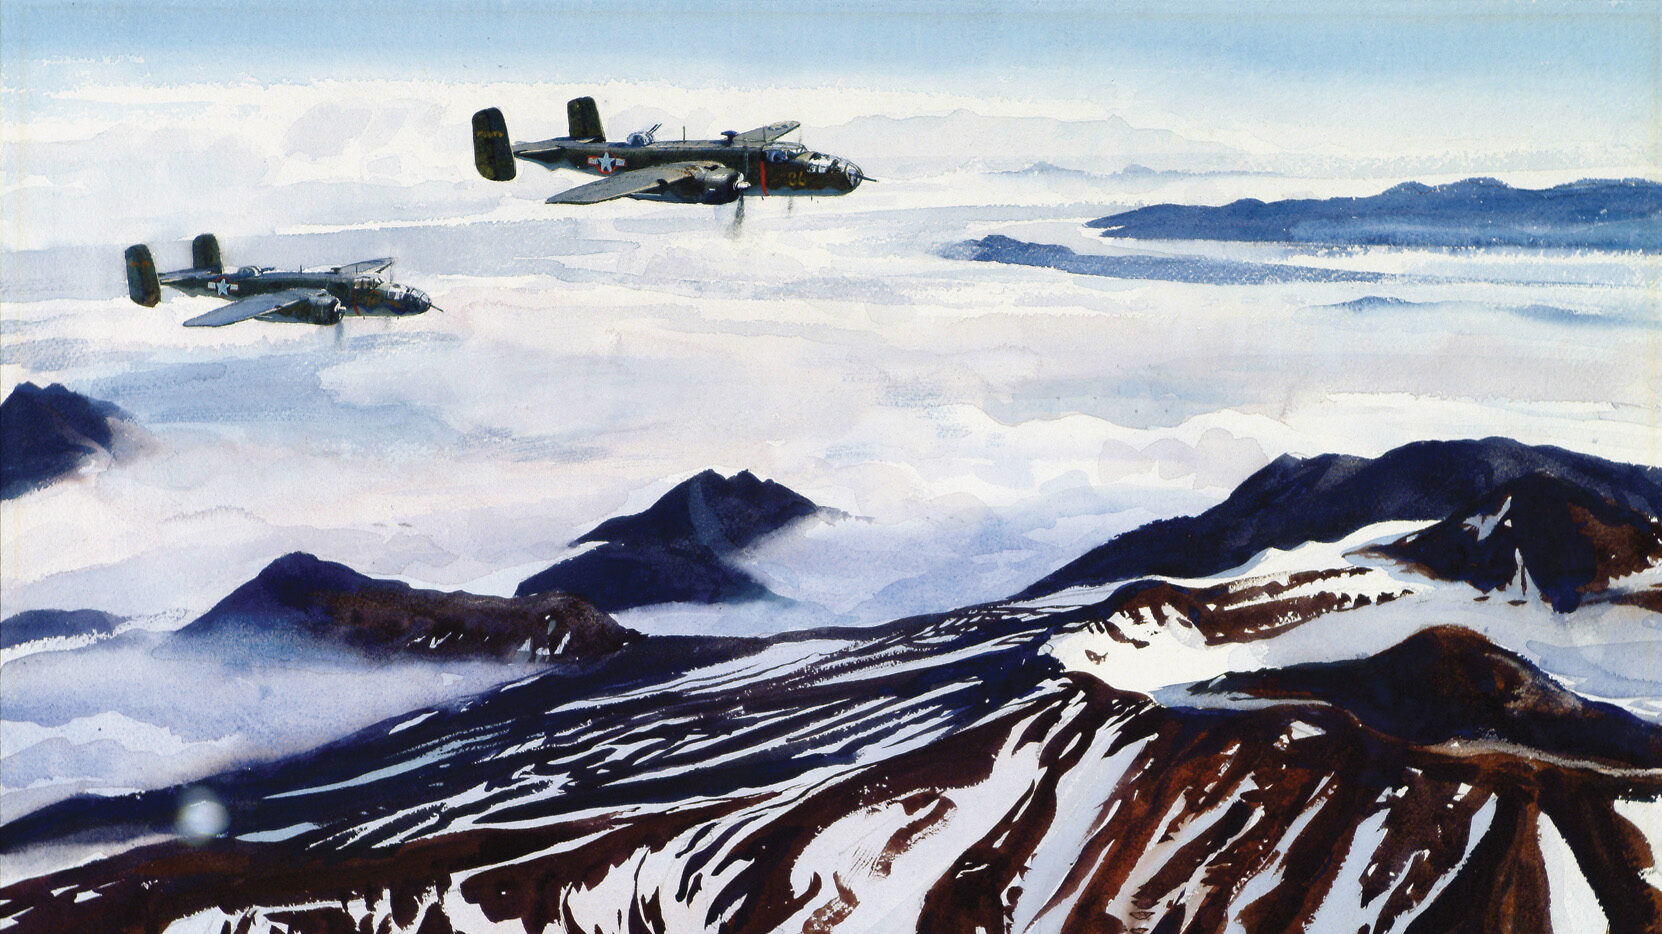 B-25 Mitchell medium bombers fly over islands covered in snow and shrouded in fog to strike at Japanese forces.